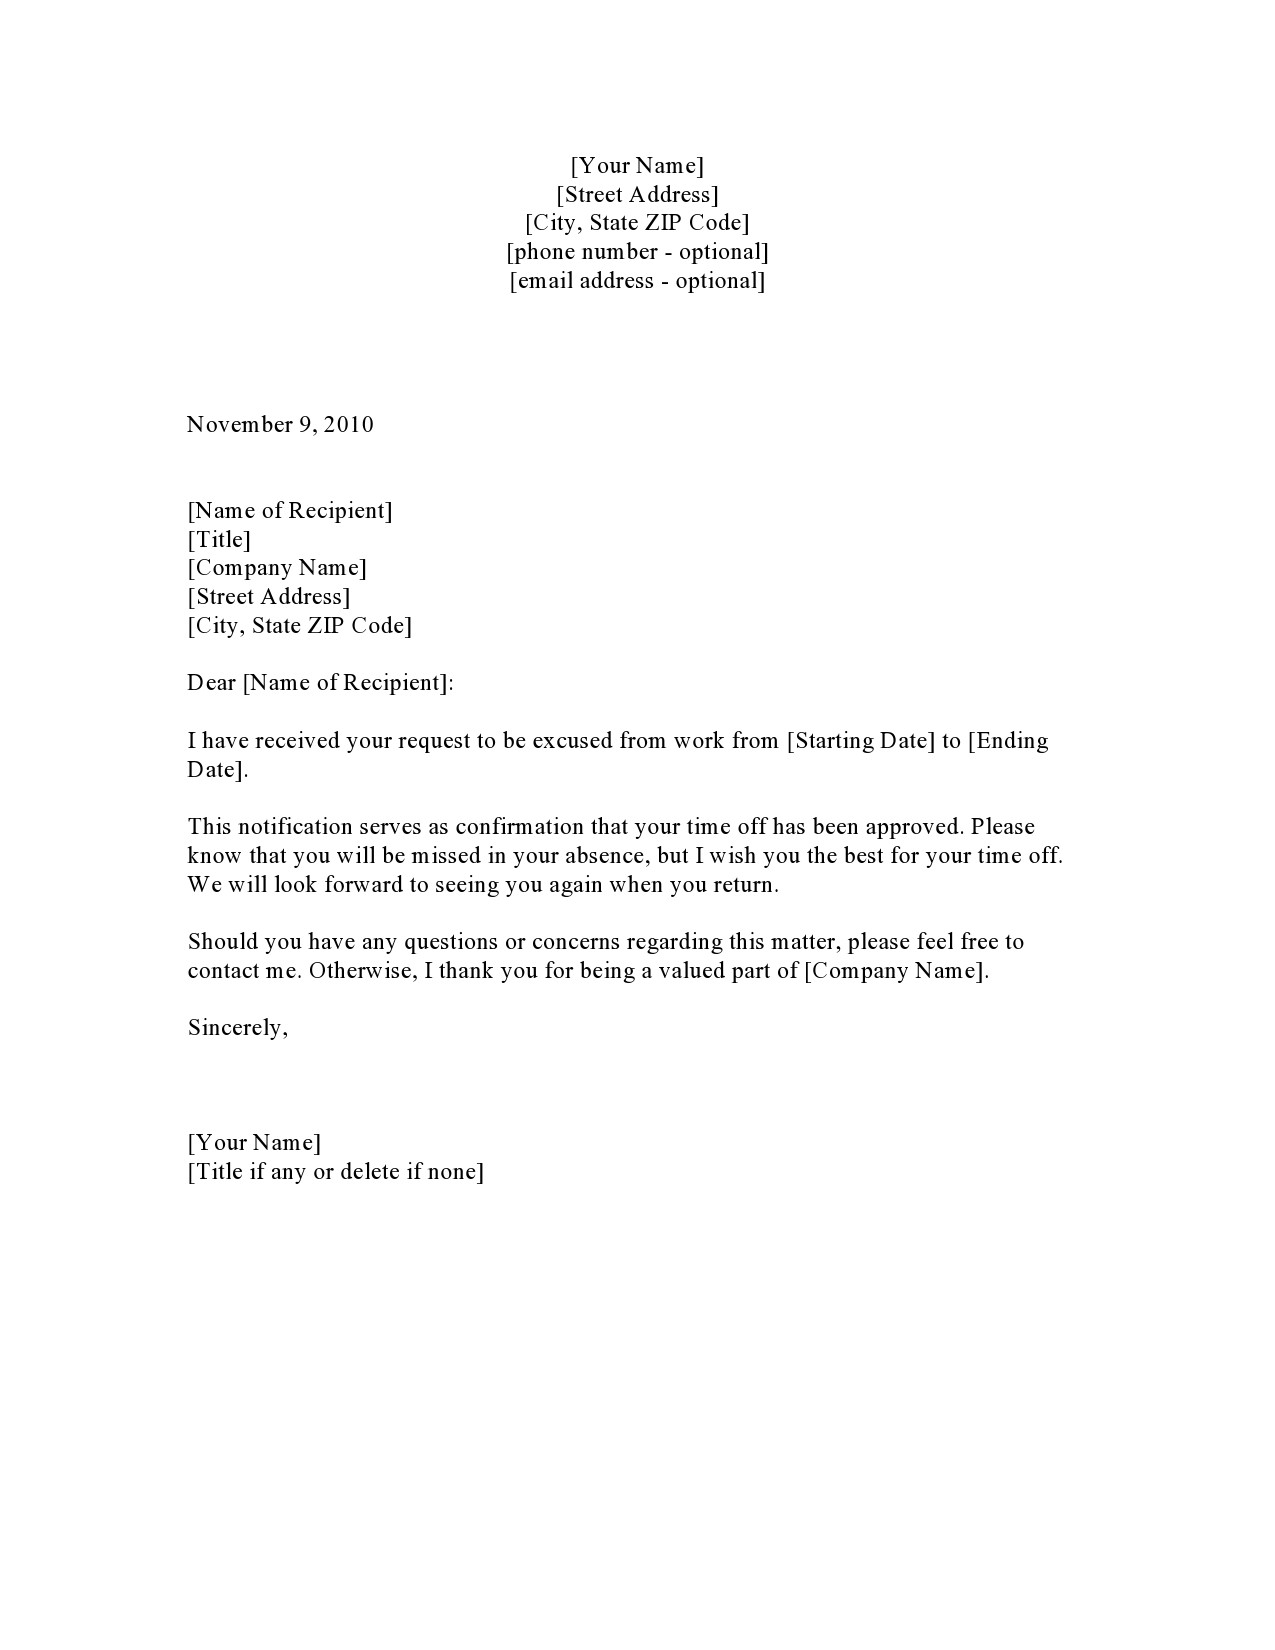 Sample Fmla Letter To Employer from templatelab.com